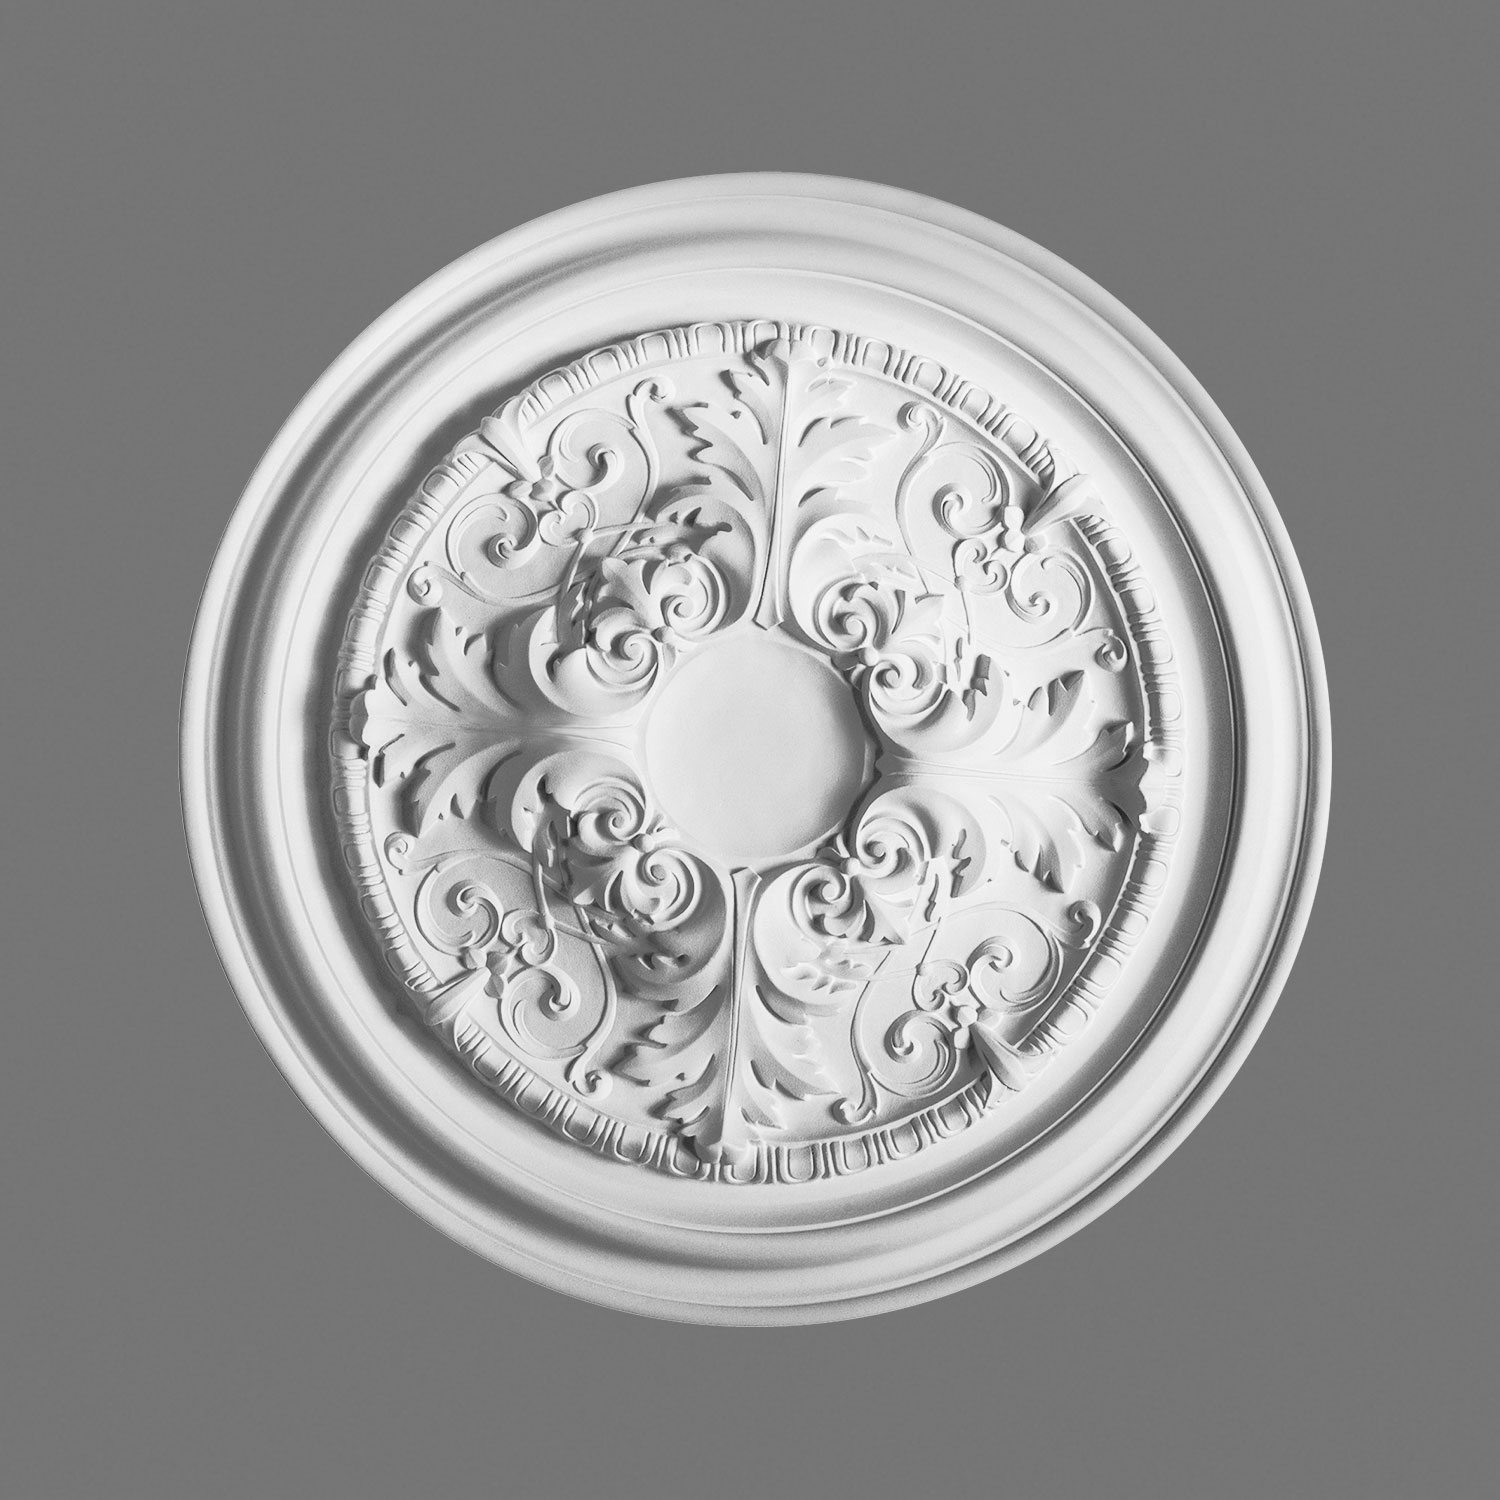 PRIMED BLANC ROND R61 ORAC Decor Canopy Dome large environ 38.10 cm Plafond Medallion 15 in